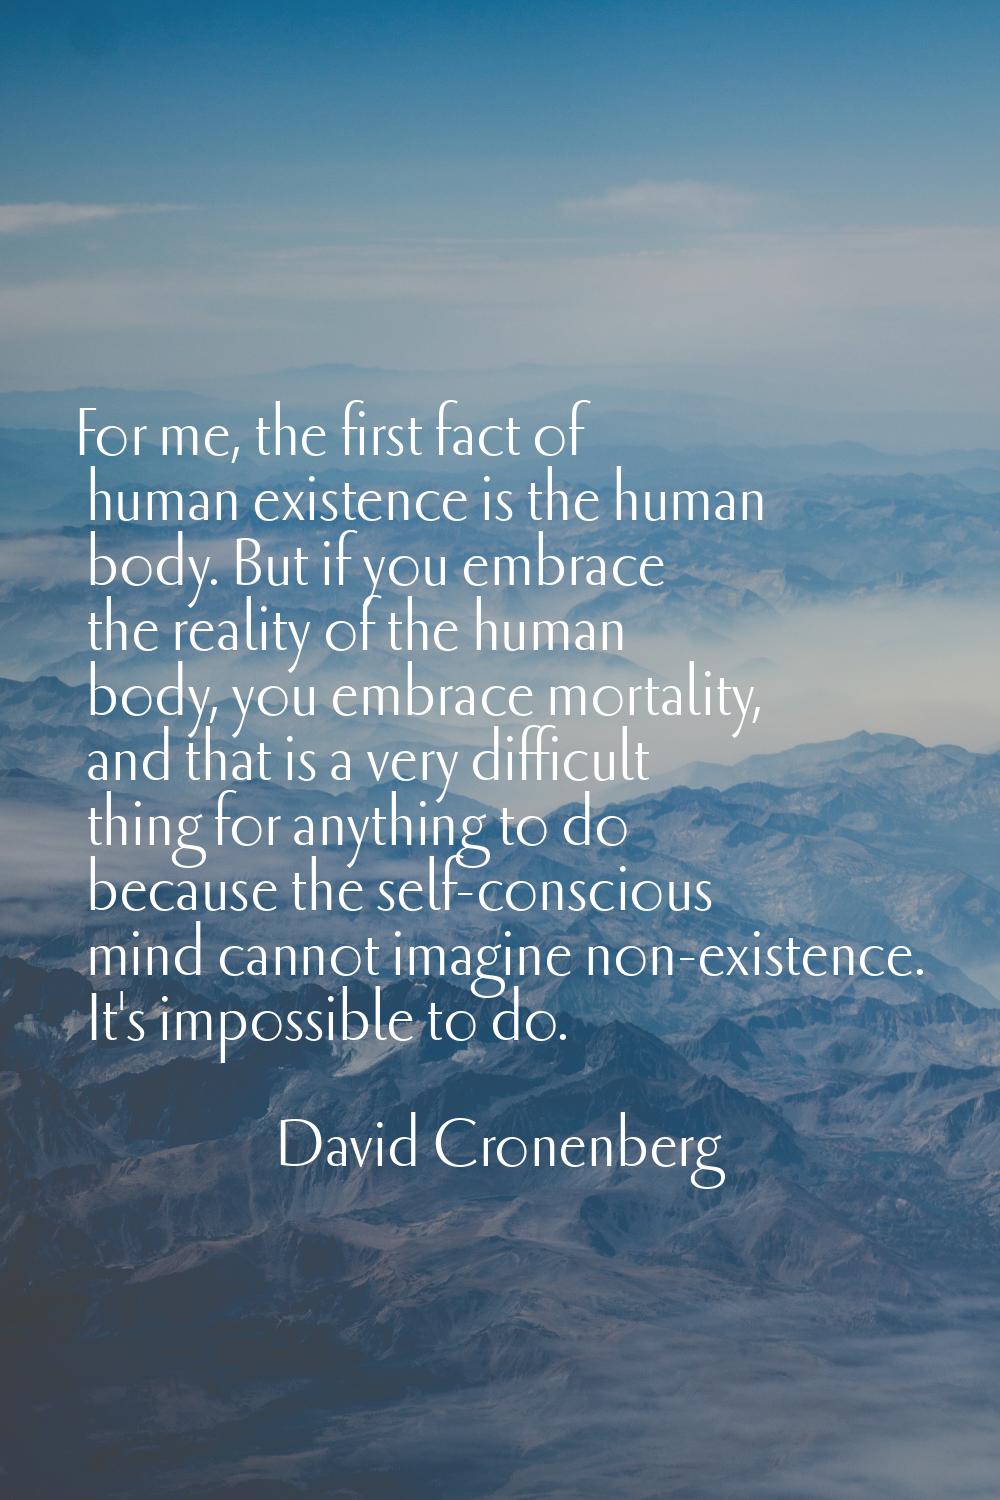 For me, the first fact of human existence is the human body. But if you embrace the reality of the 